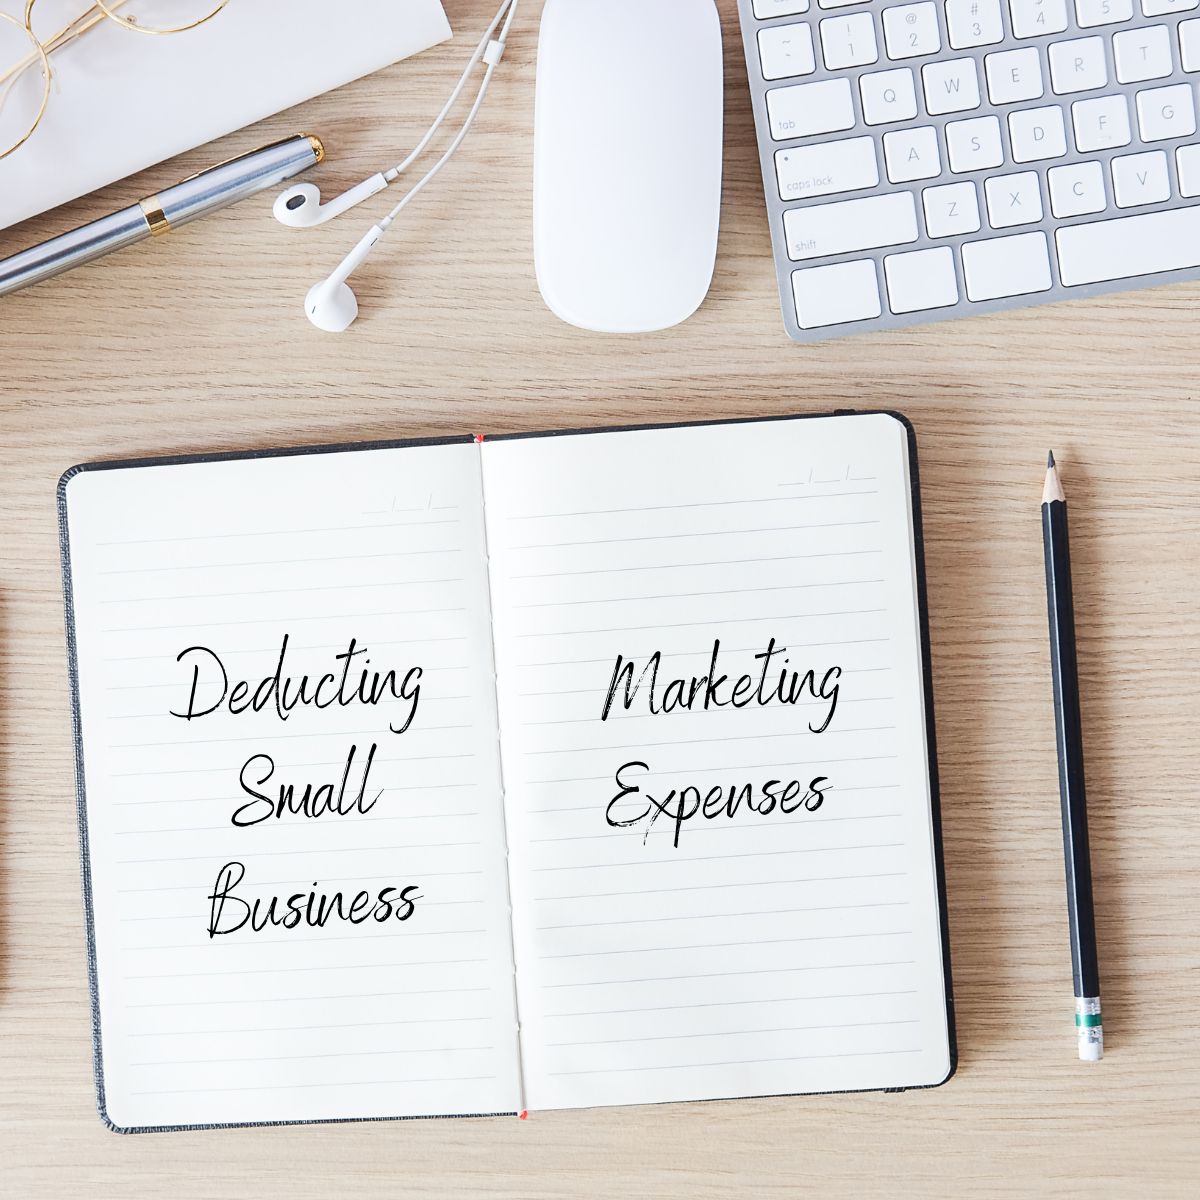 Deducting Small Business Marketing Expenses